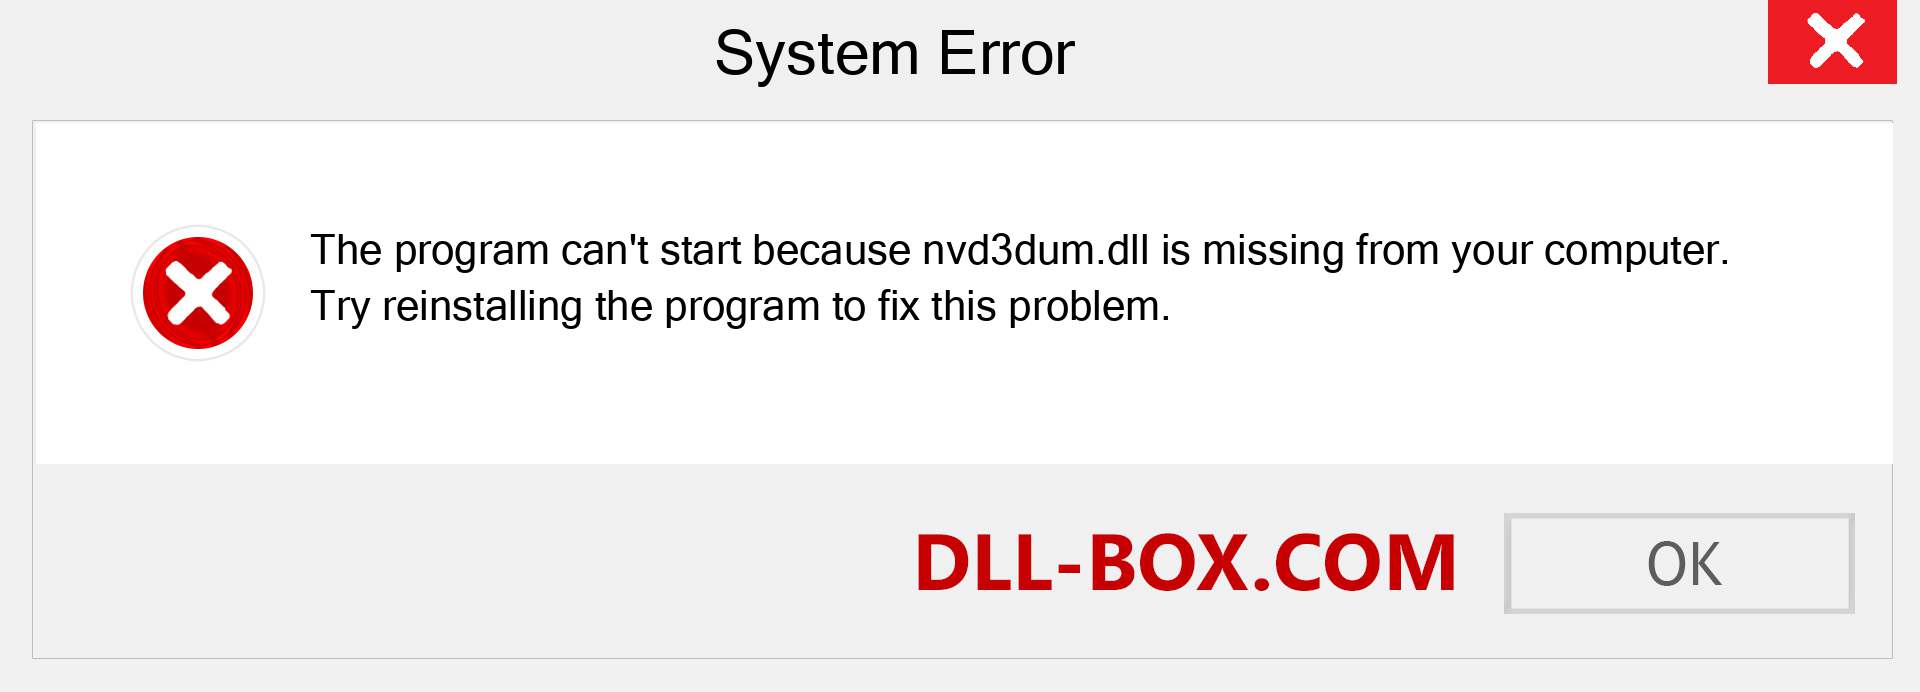  nvd3dum.dll file is missing?. Download for Windows 7, 8, 10 - Fix  nvd3dum dll Missing Error on Windows, photos, images